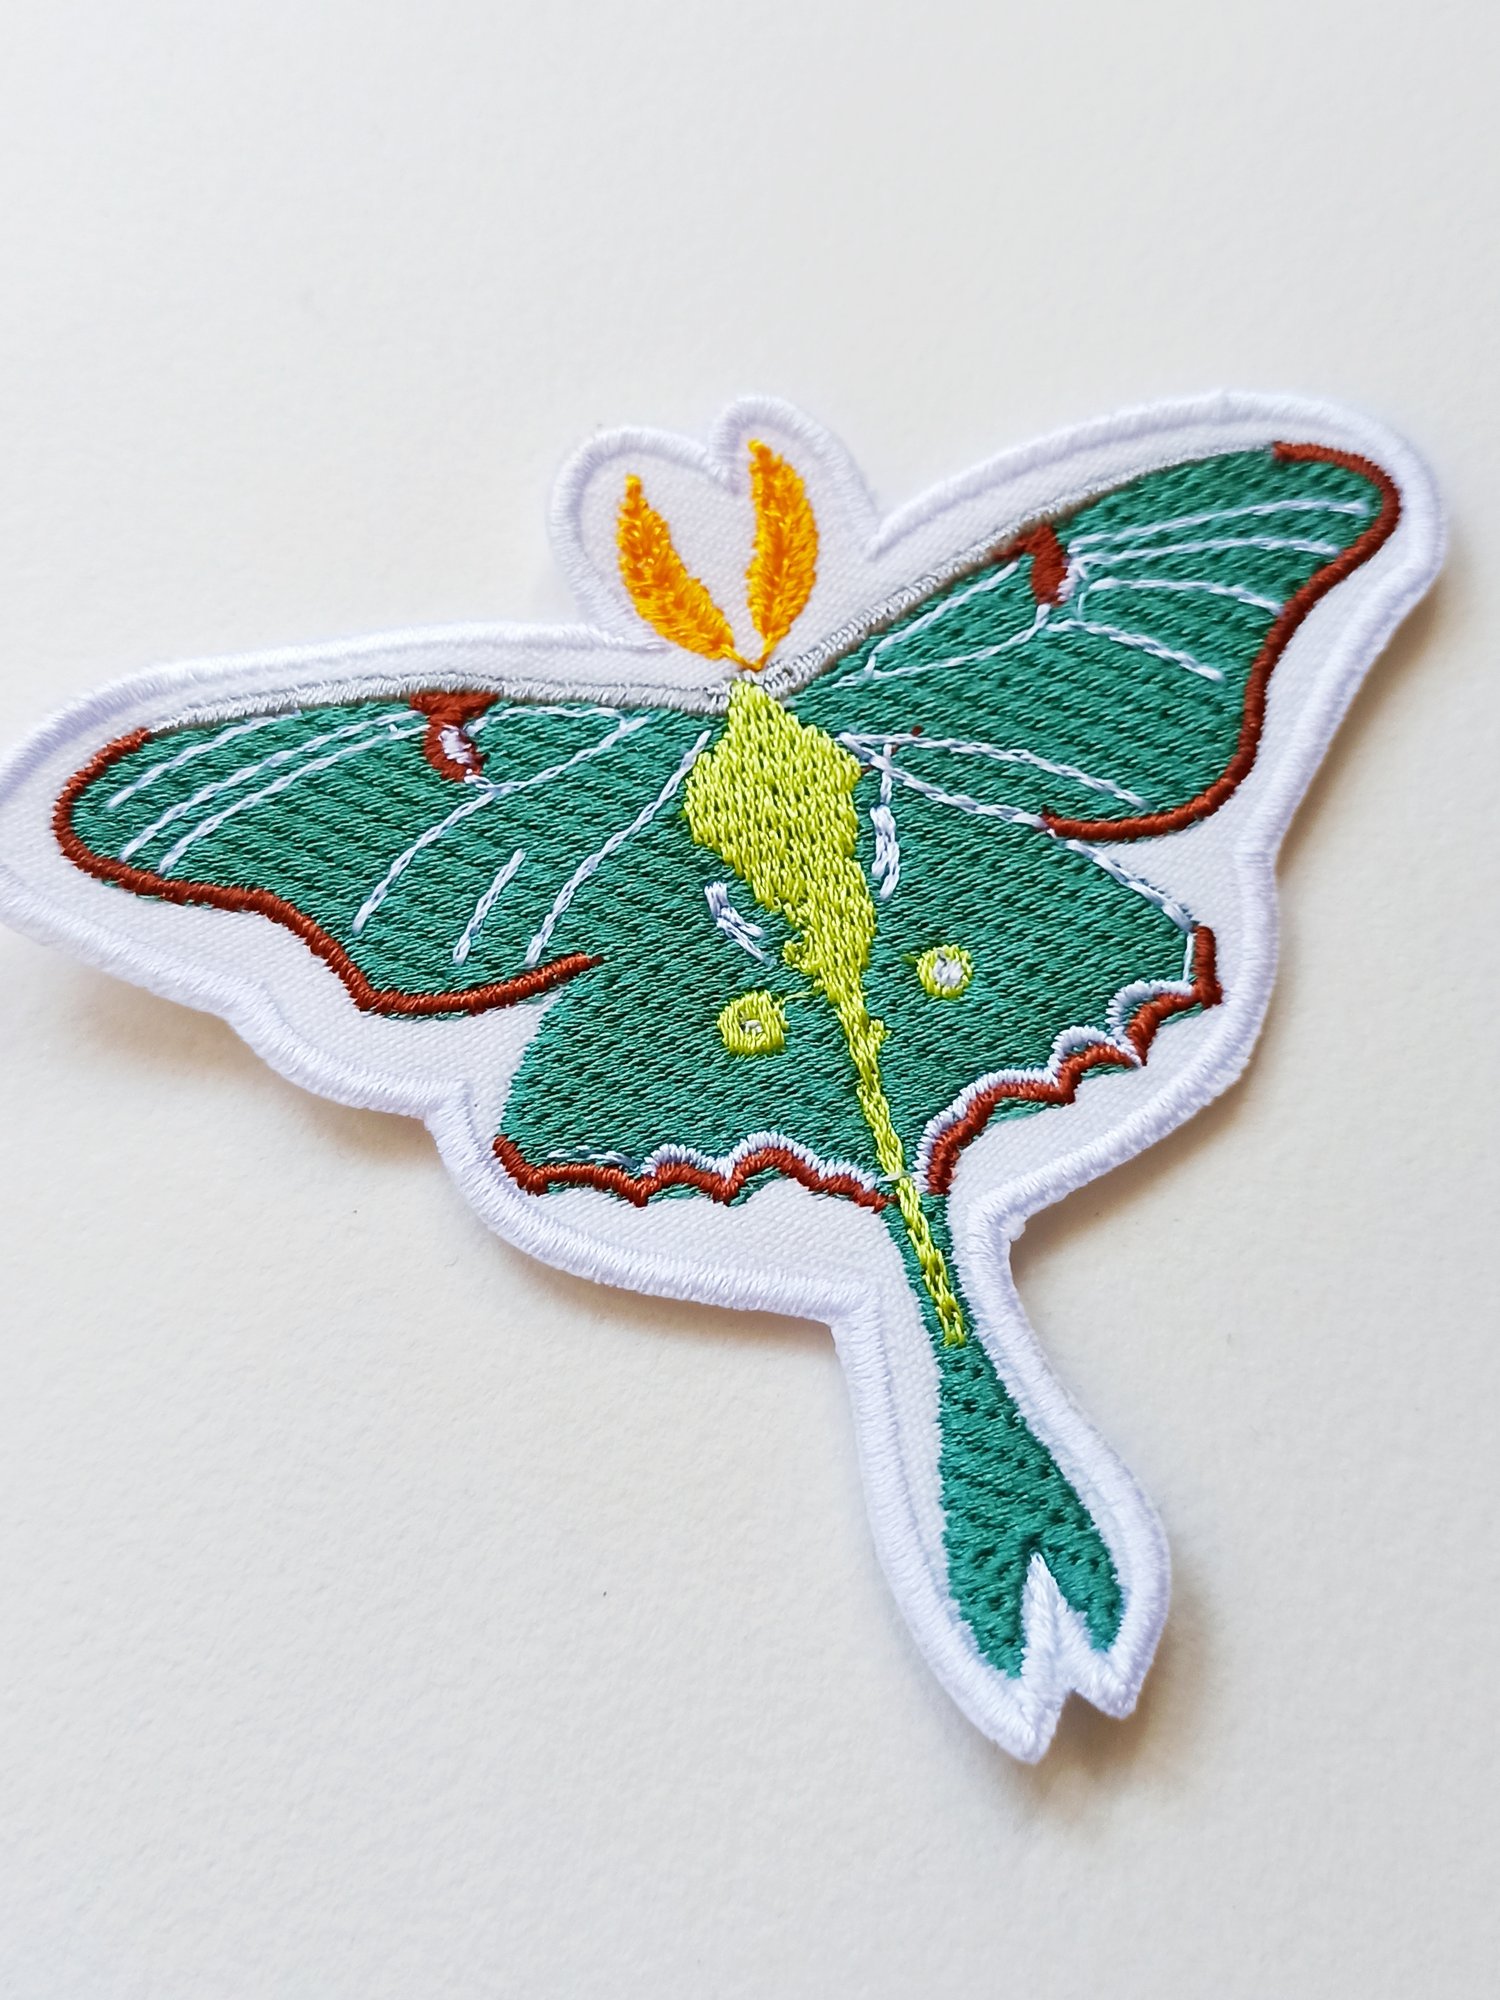 Image of Mystical Luna Moth Embroidered patch.